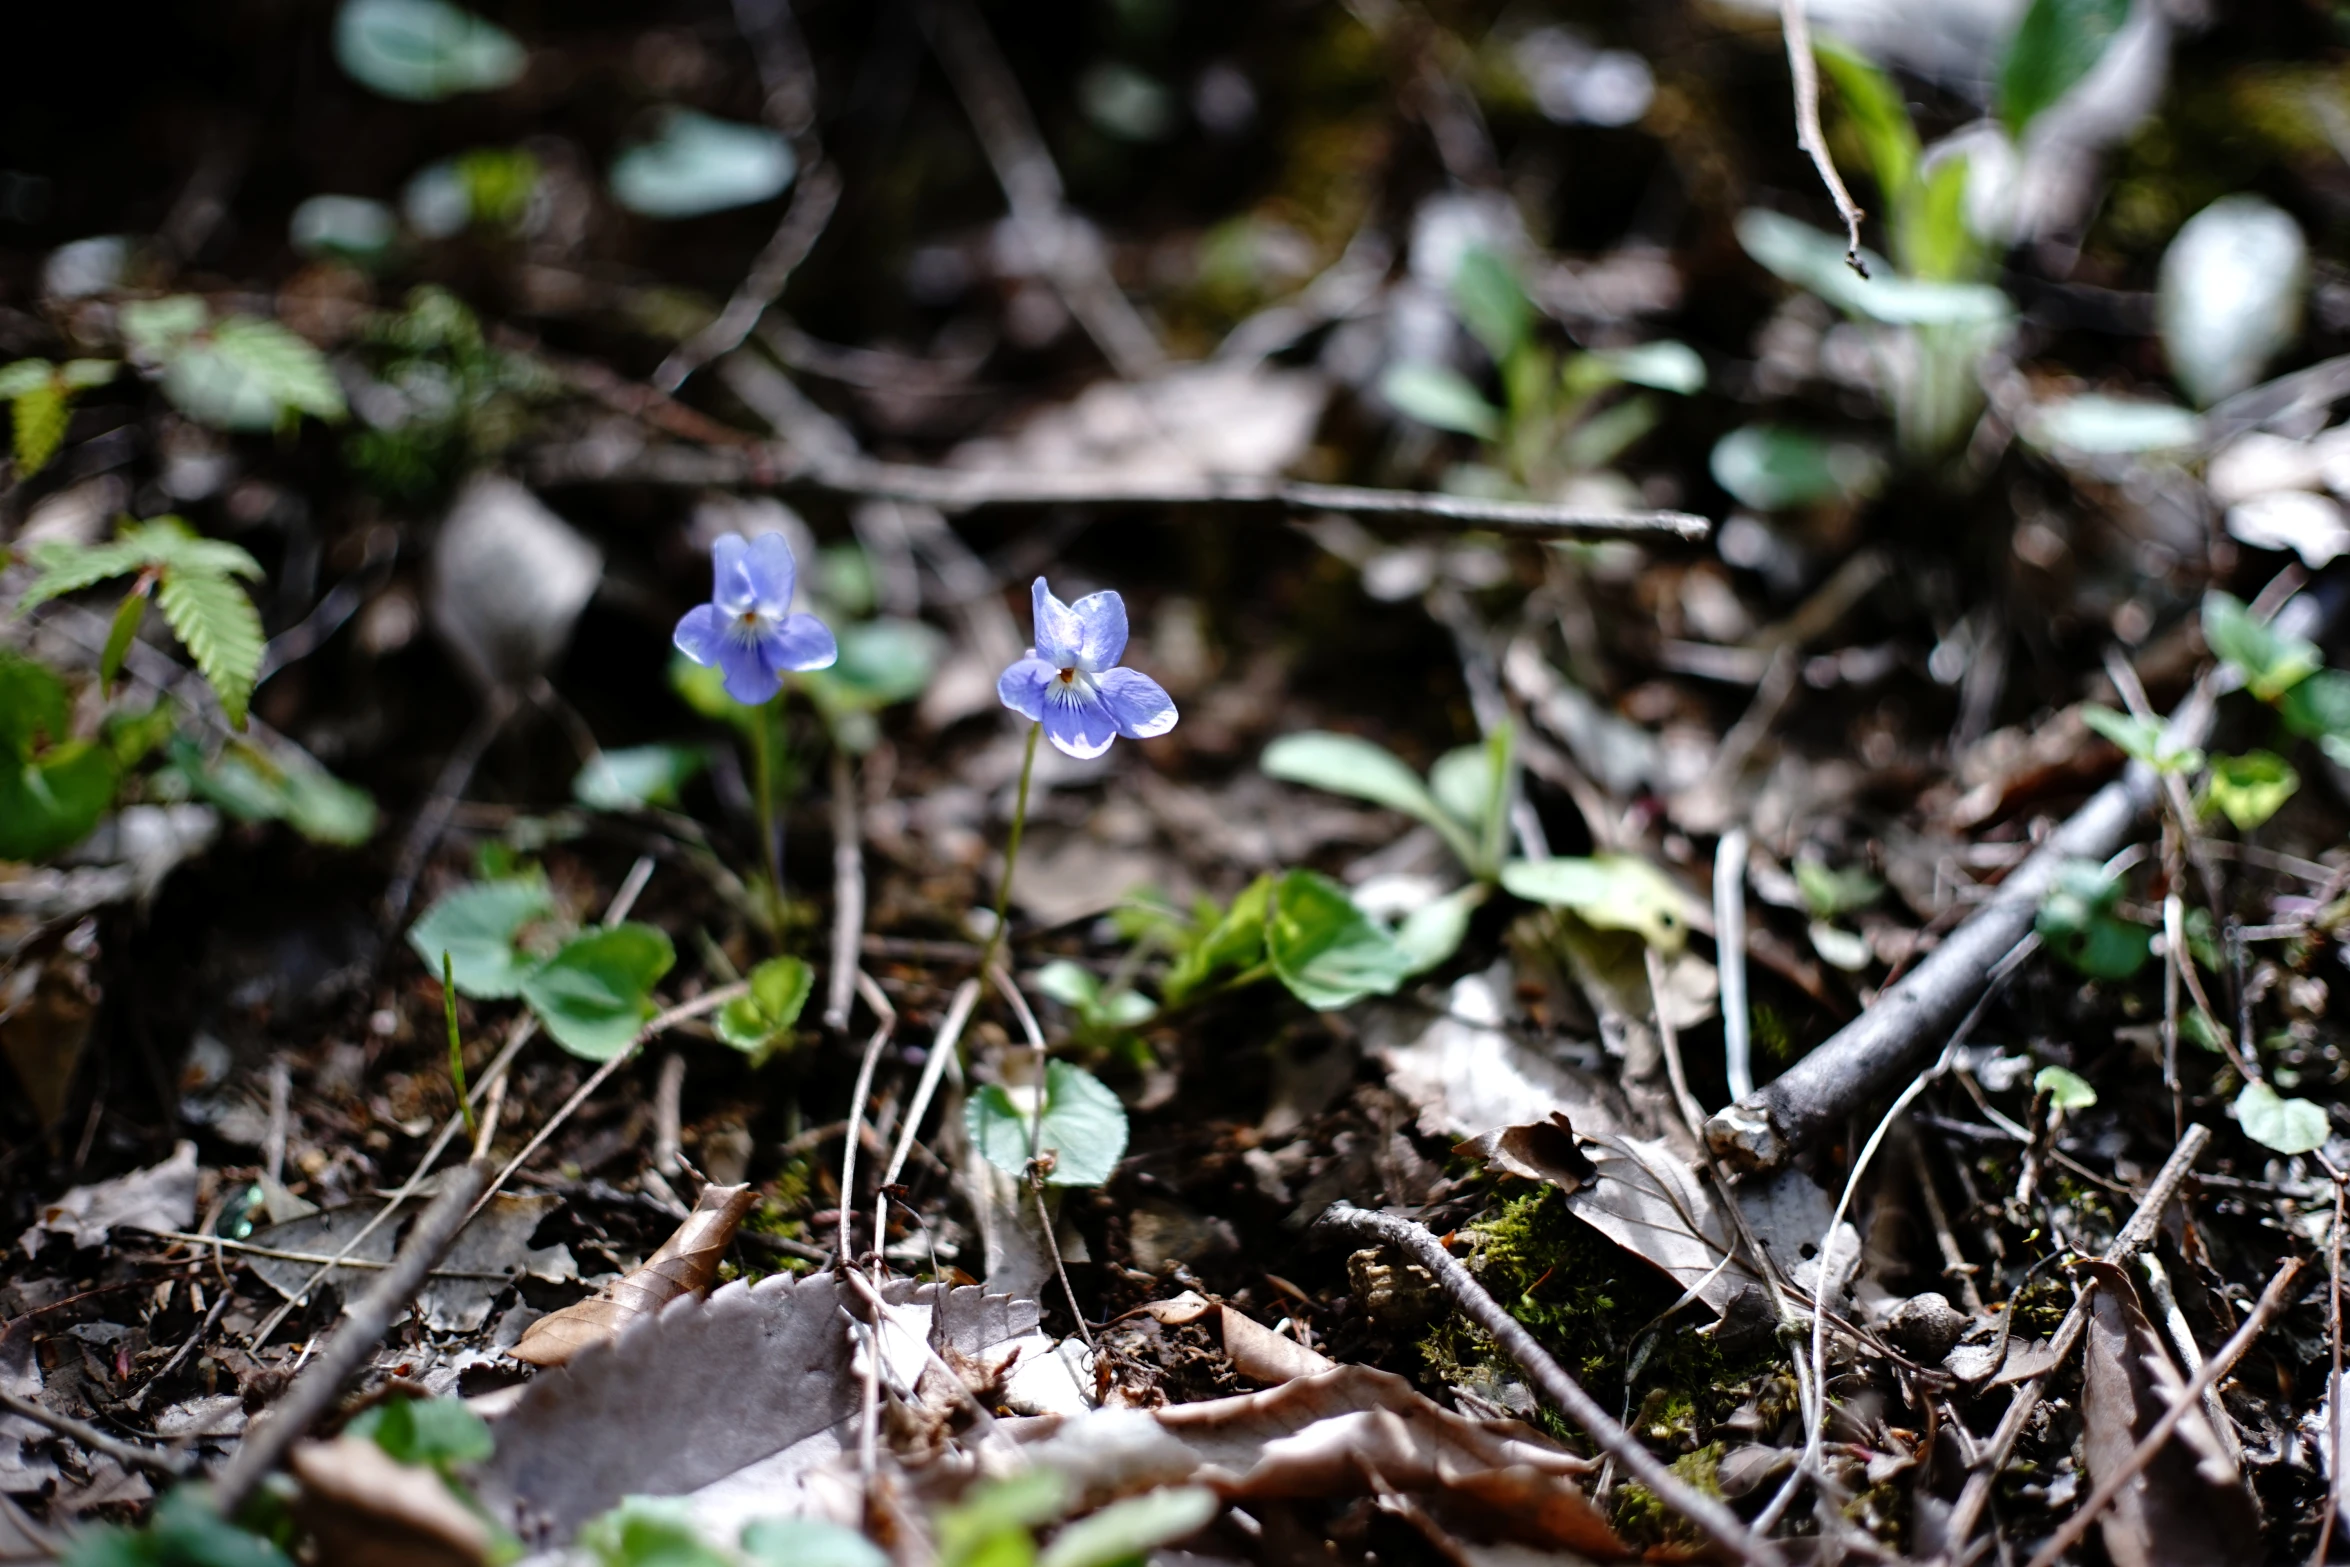 a blue flower that is on some dirt